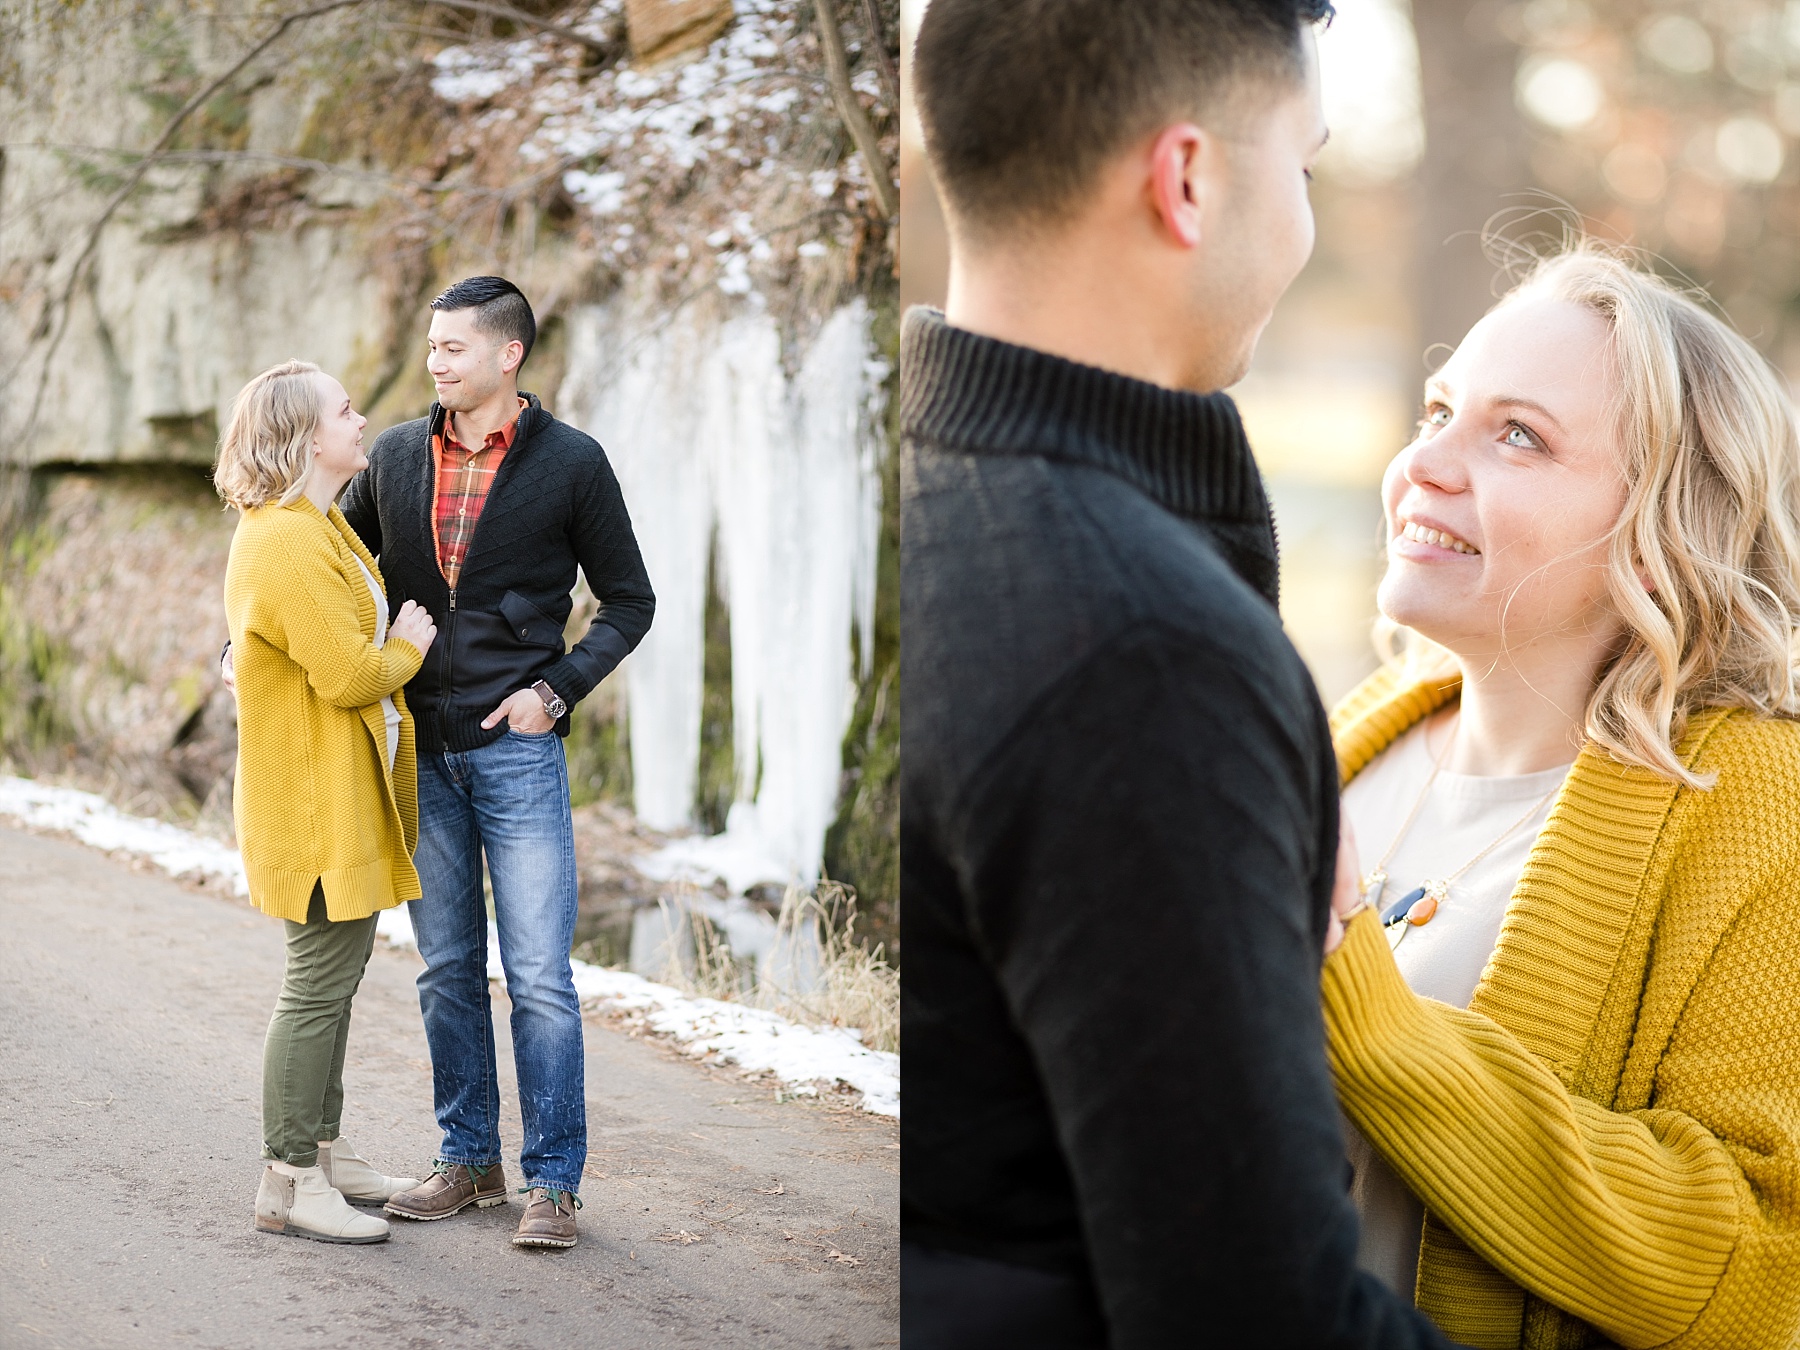 Rock formation engagement photos with ice hanging.